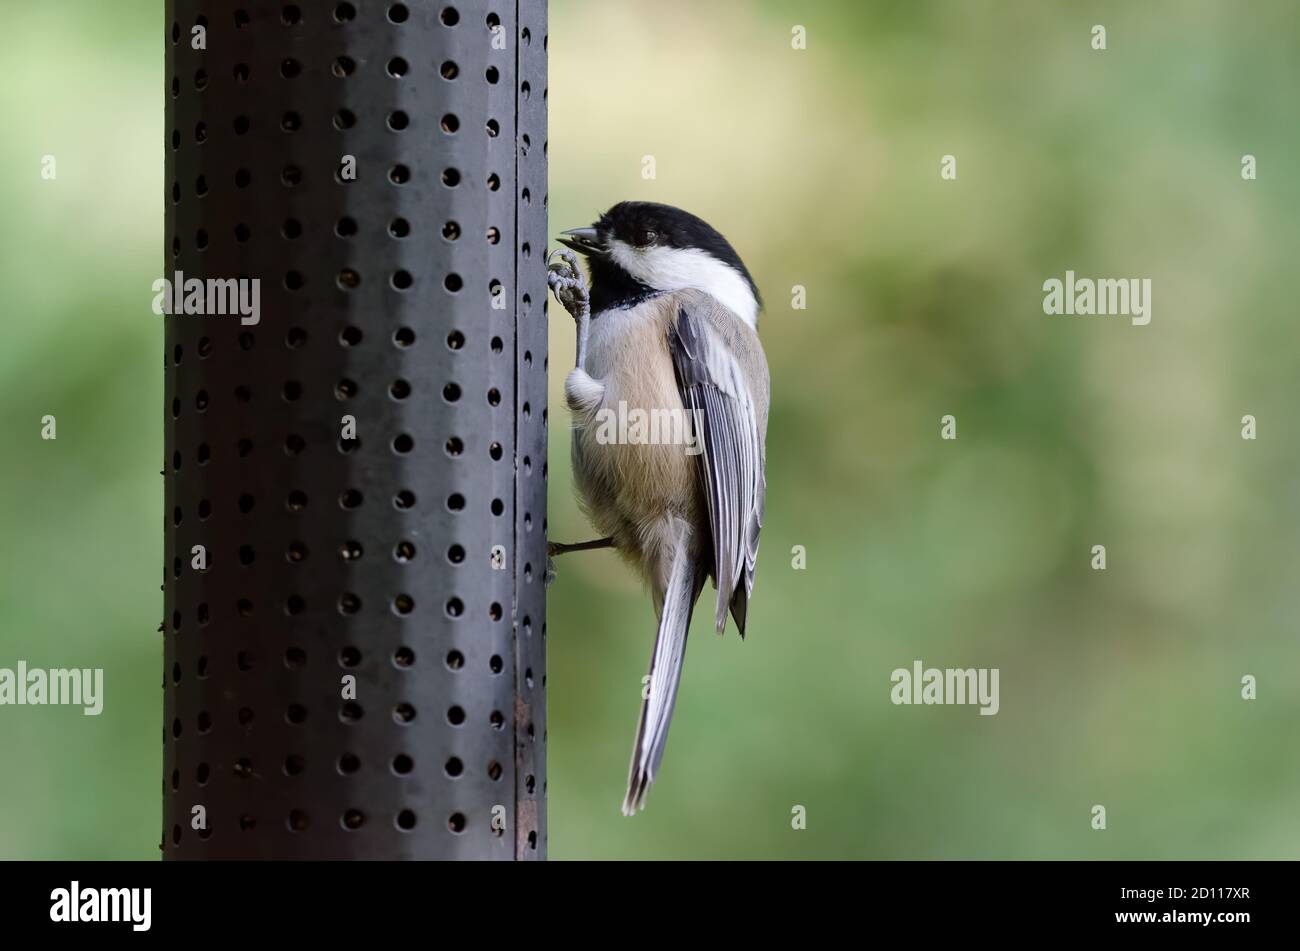 Black-capped Chickadee (Poecile atricapillus) eating niger seed from a backyard bird feeder Stock Photo